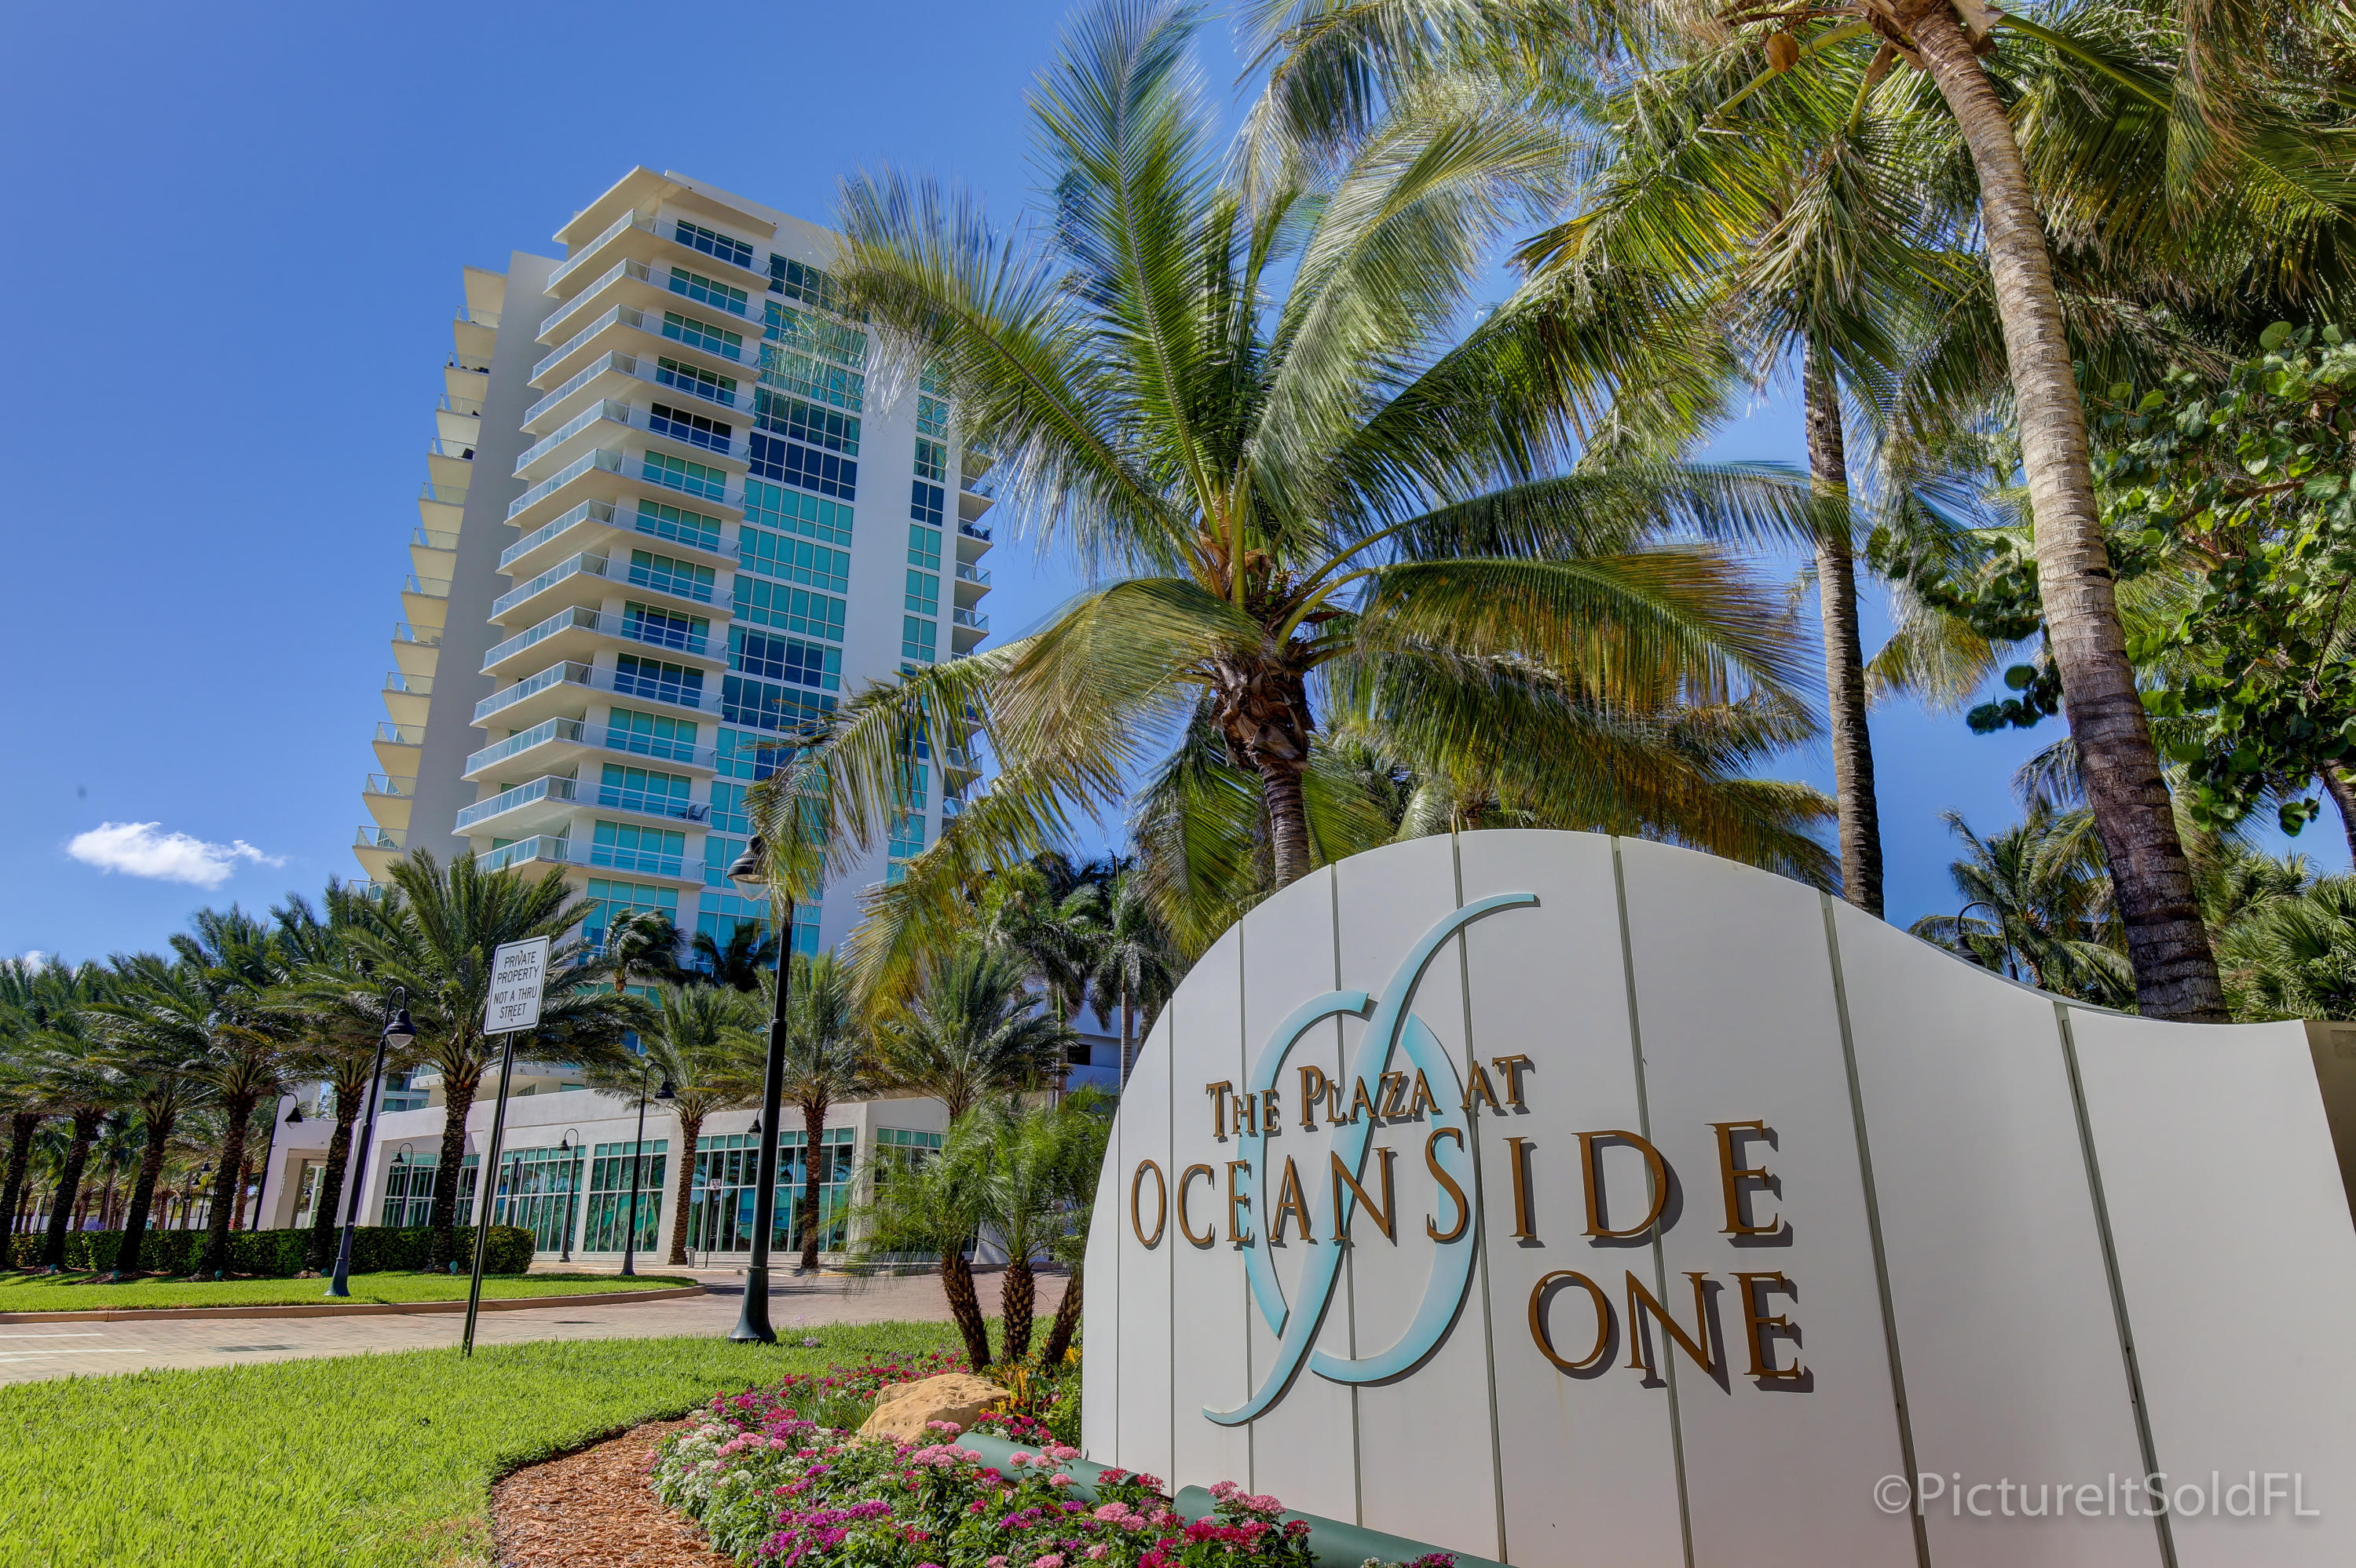 The Plaza at Oceanside